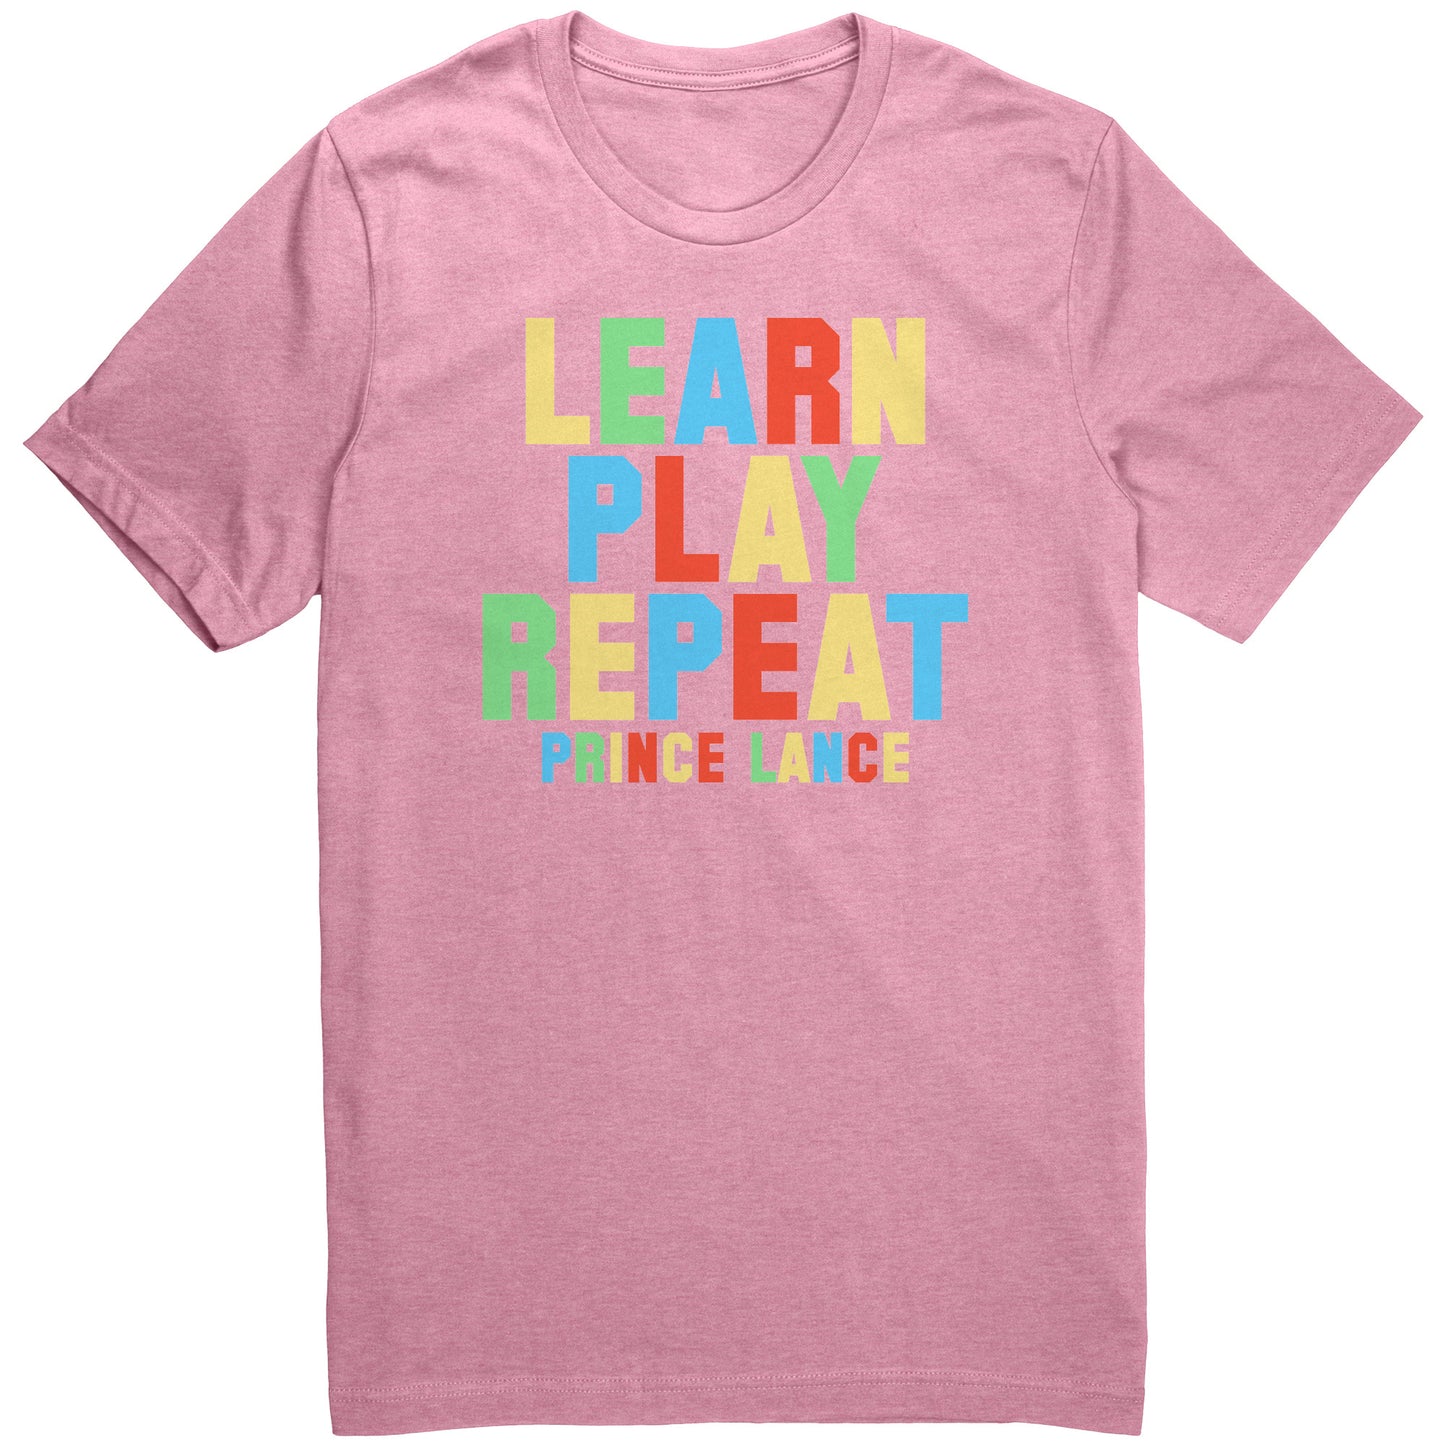 Learn Play Repeat [Adult Unisex]